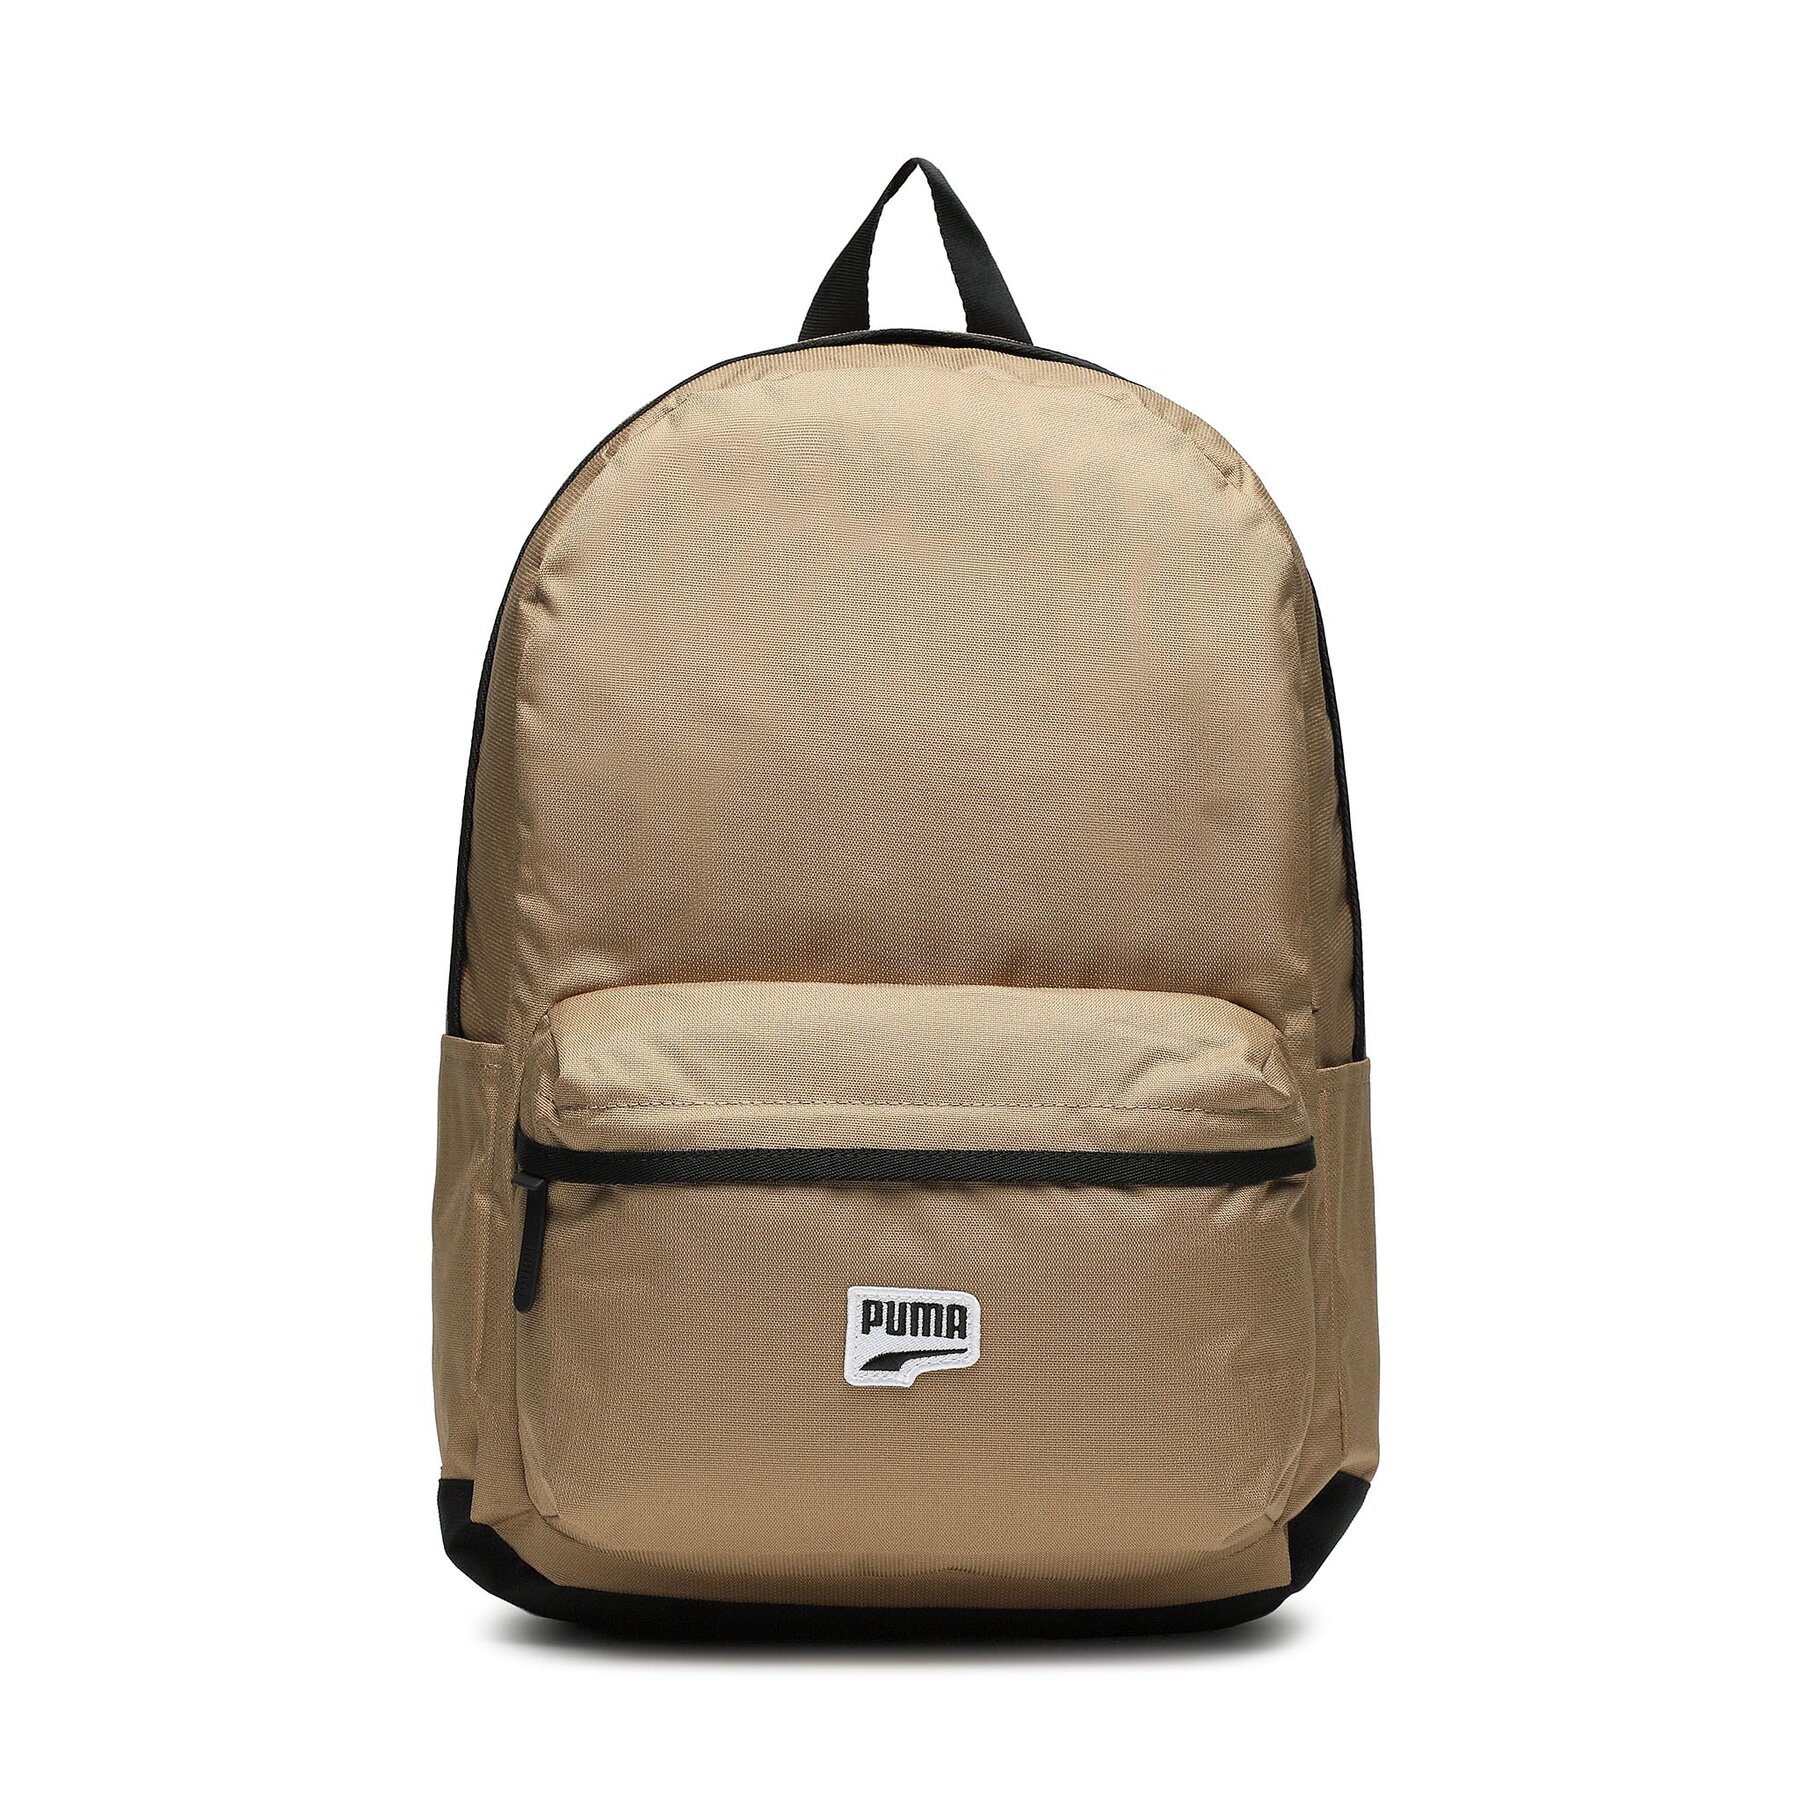 Rucksack Puma Downtown Backpack Toasted 079659 04 Toasted von Puma